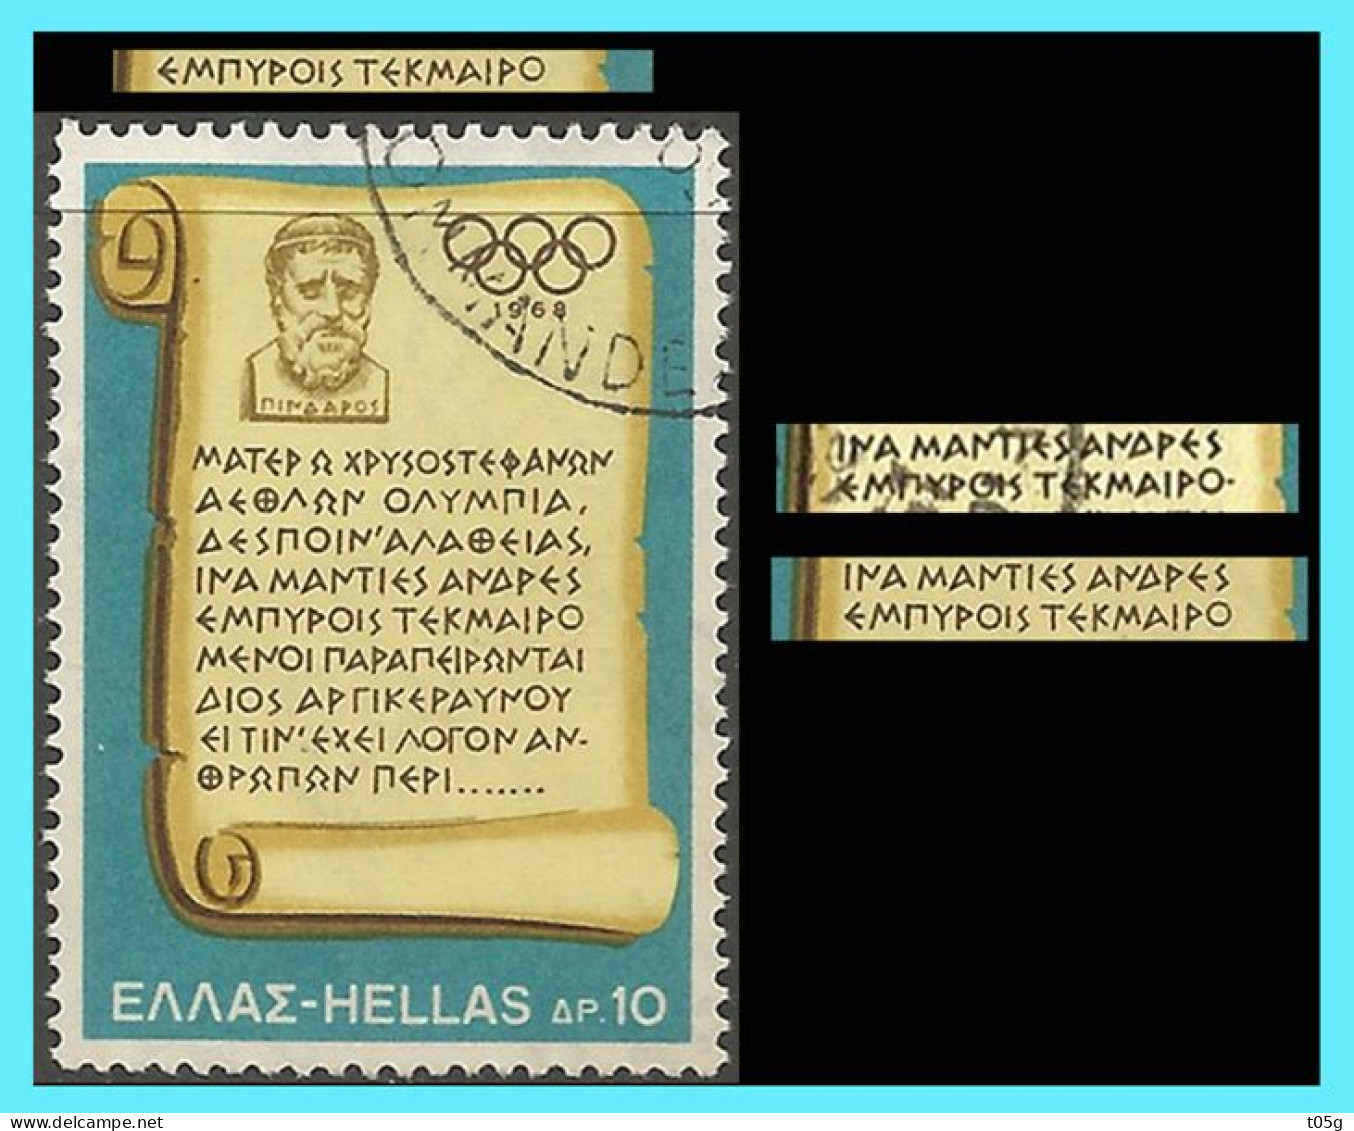 GREECE -GRECE- HELLAS 1968: Stamps (without --) TEKMAIPO Instead Of TEKMAIPO-- "Olympic Games Mexico" - Gebraucht